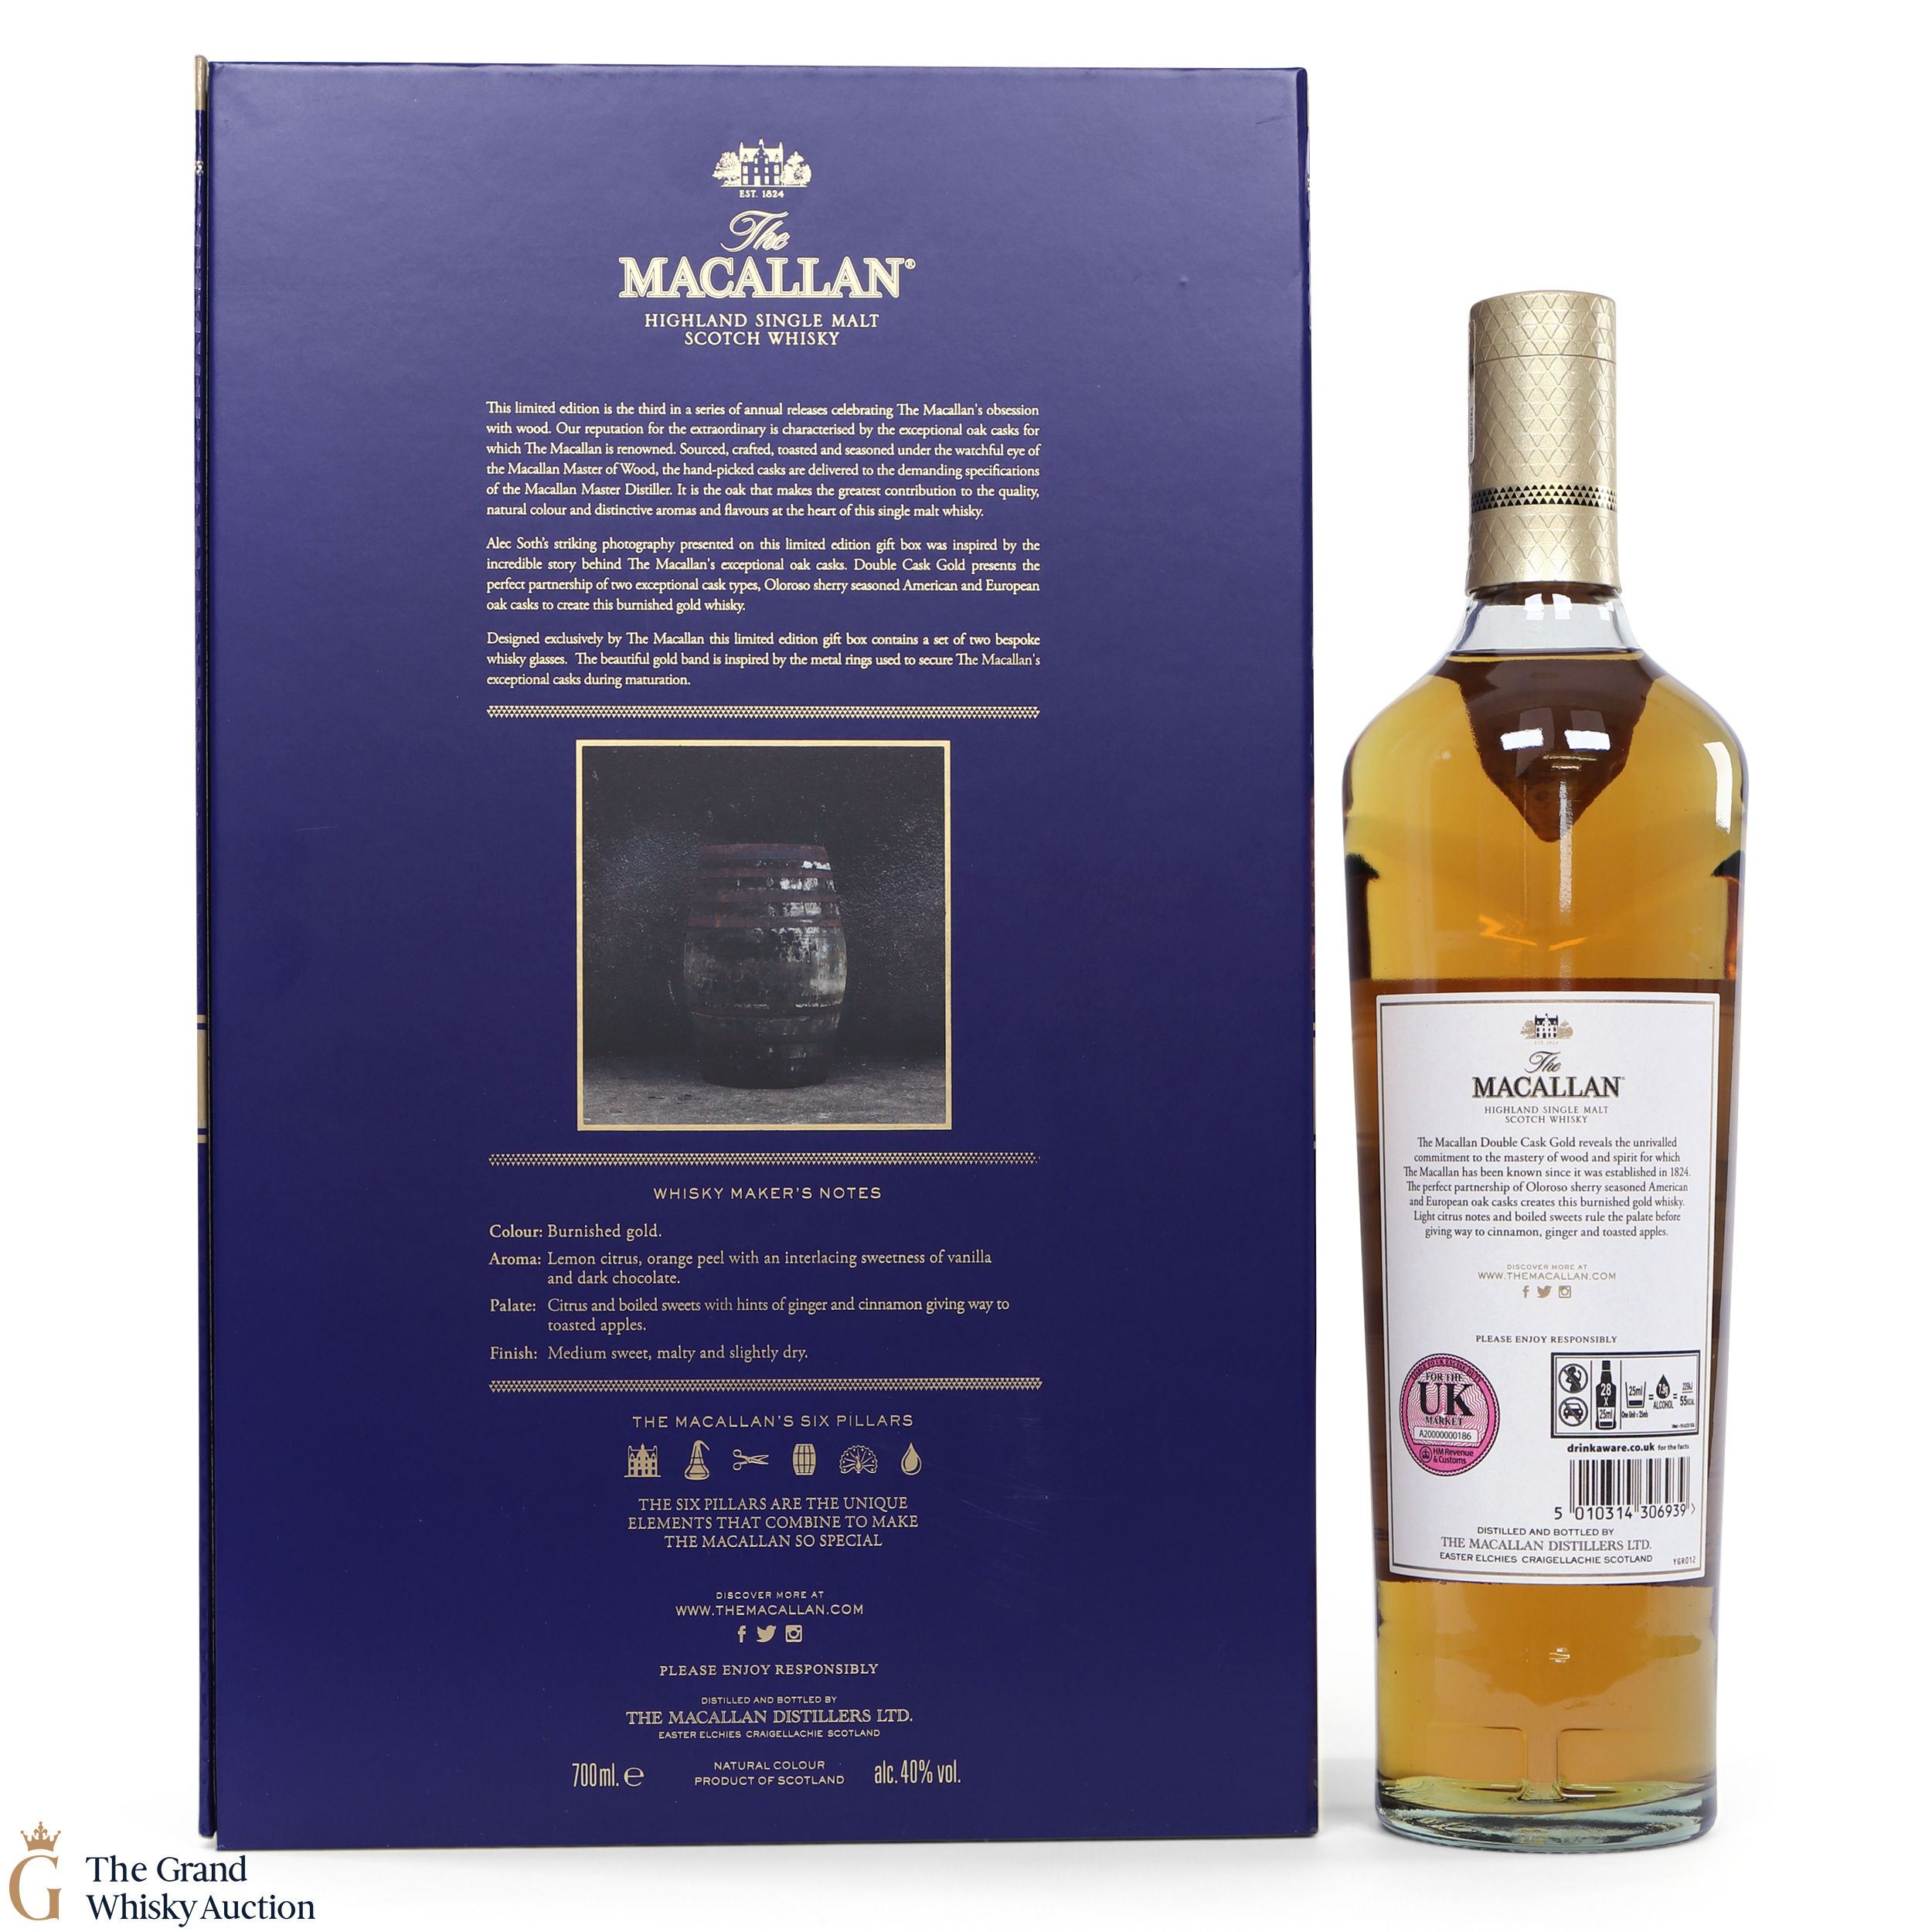 Macallan Gold Double Cask Limited Edition With 2 X Glasses Auction The Grand Whisky Auction